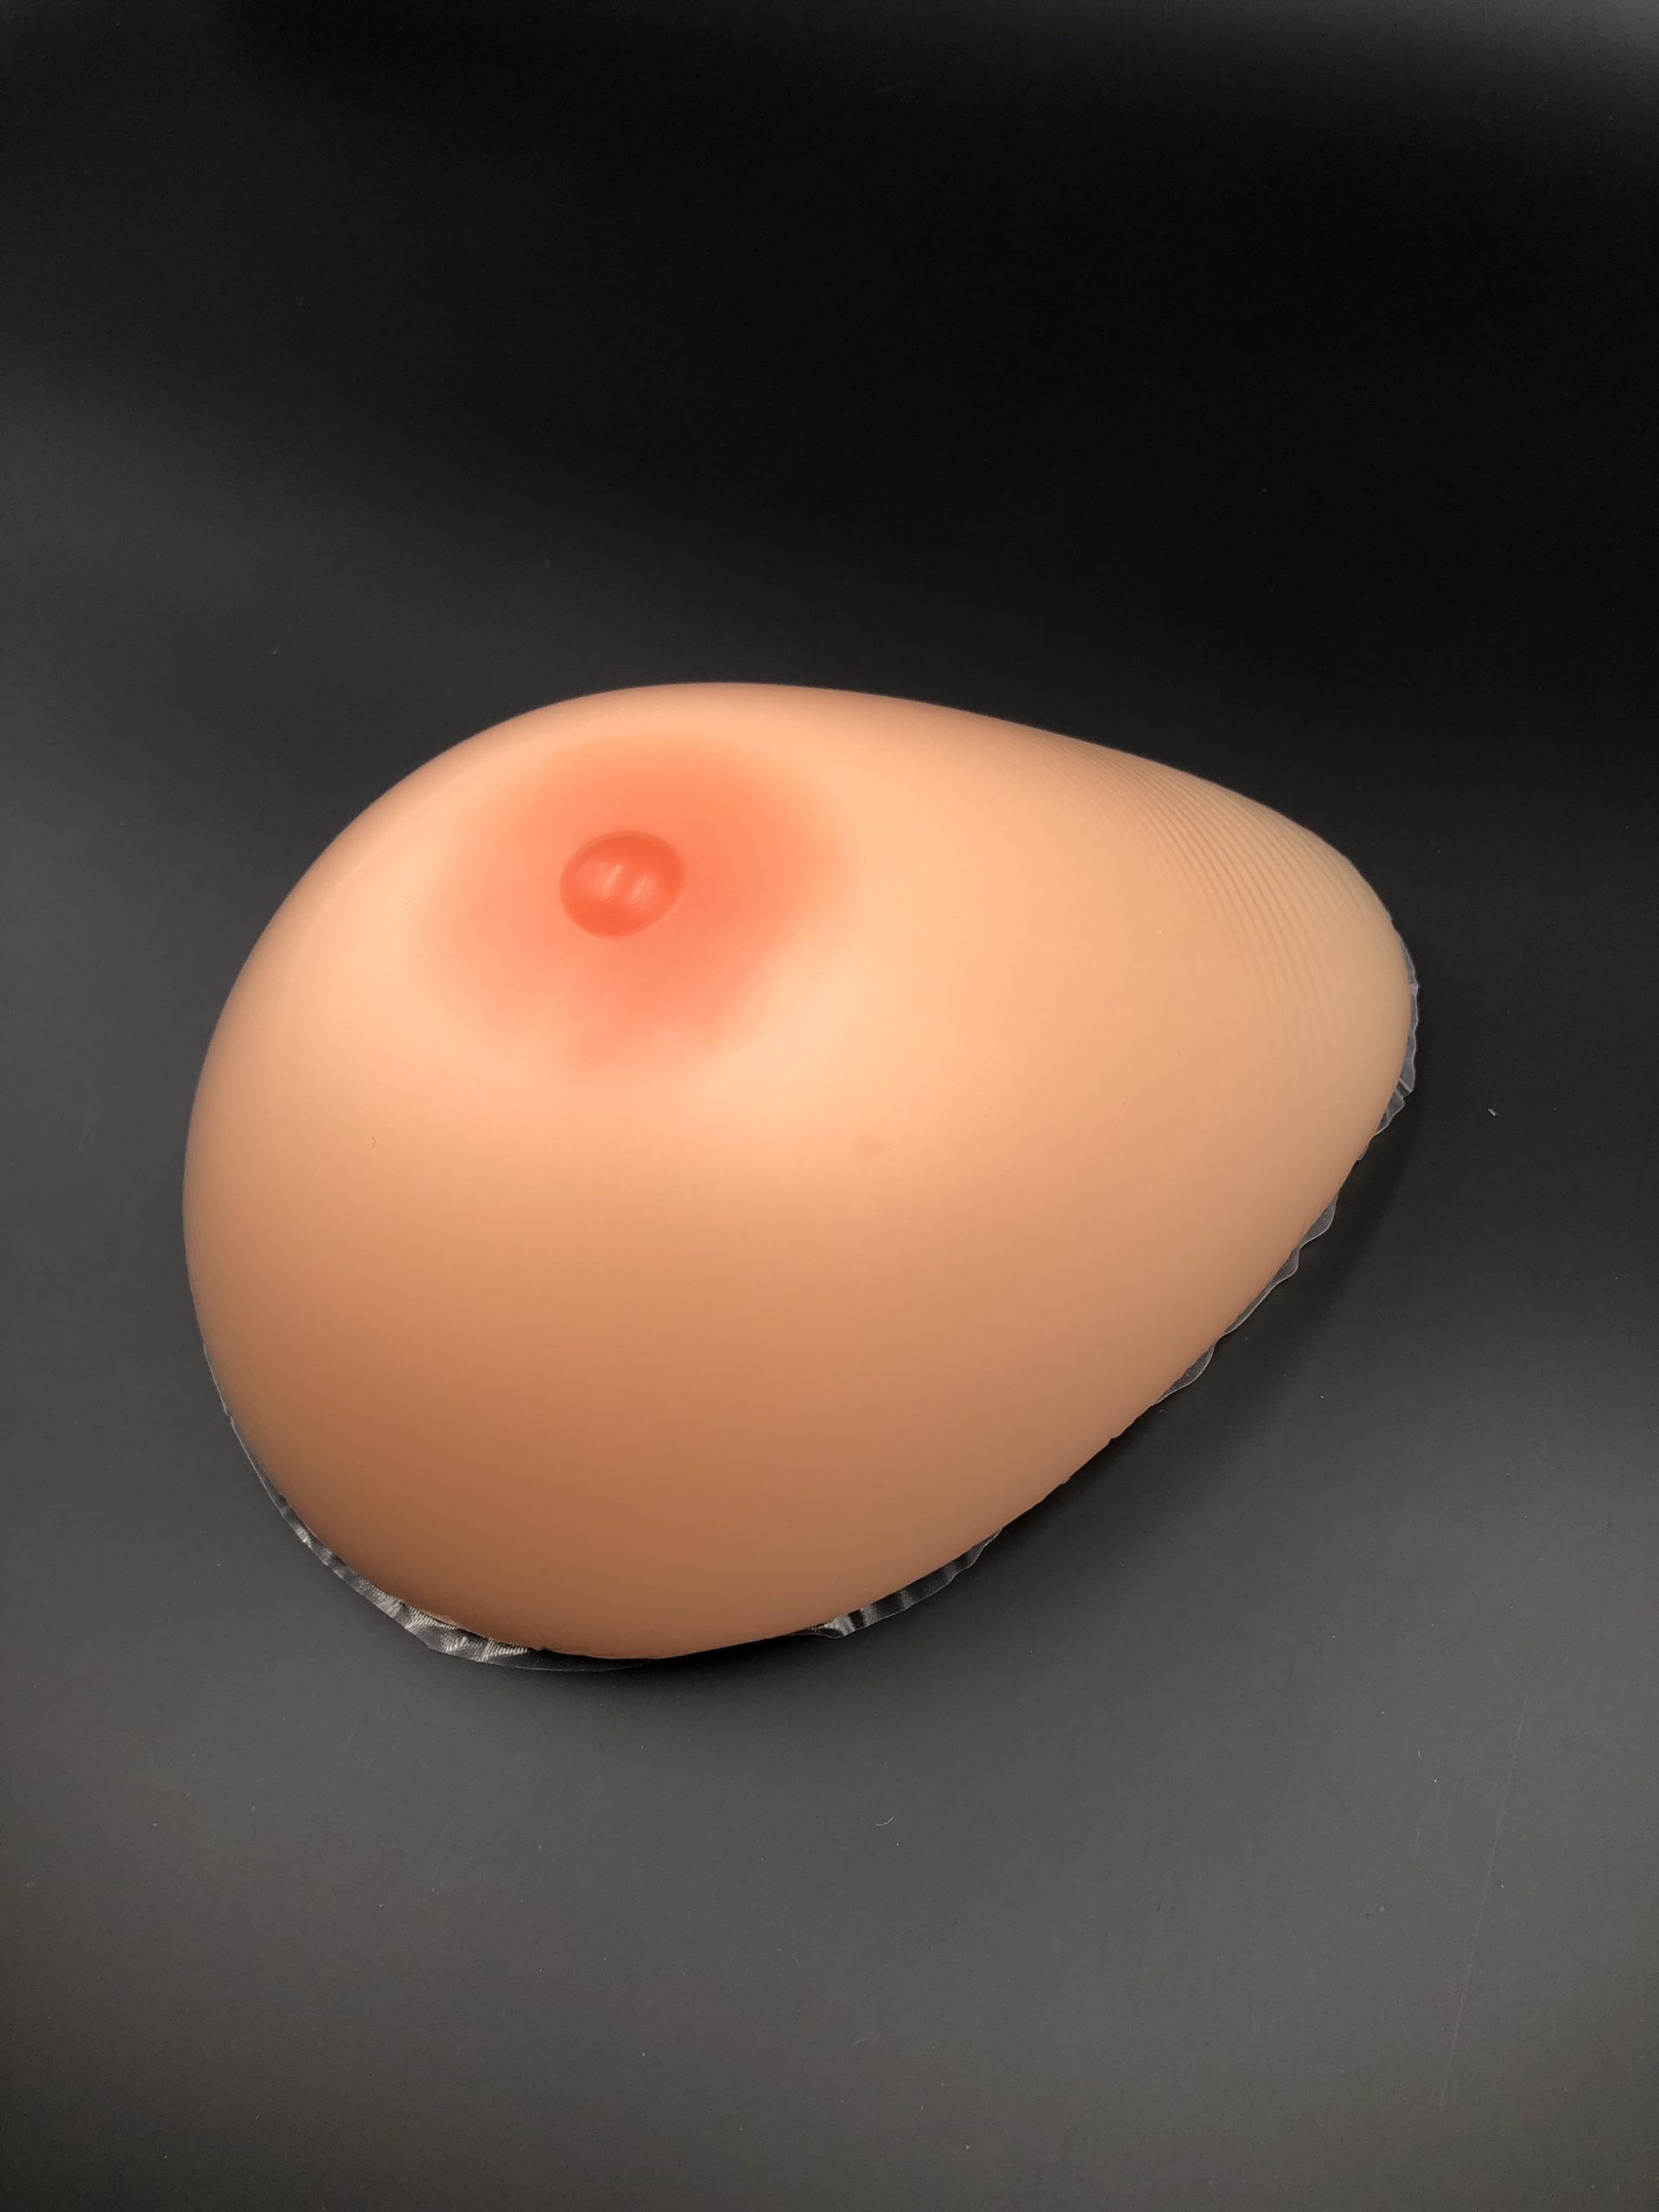 What Is A Breast Form